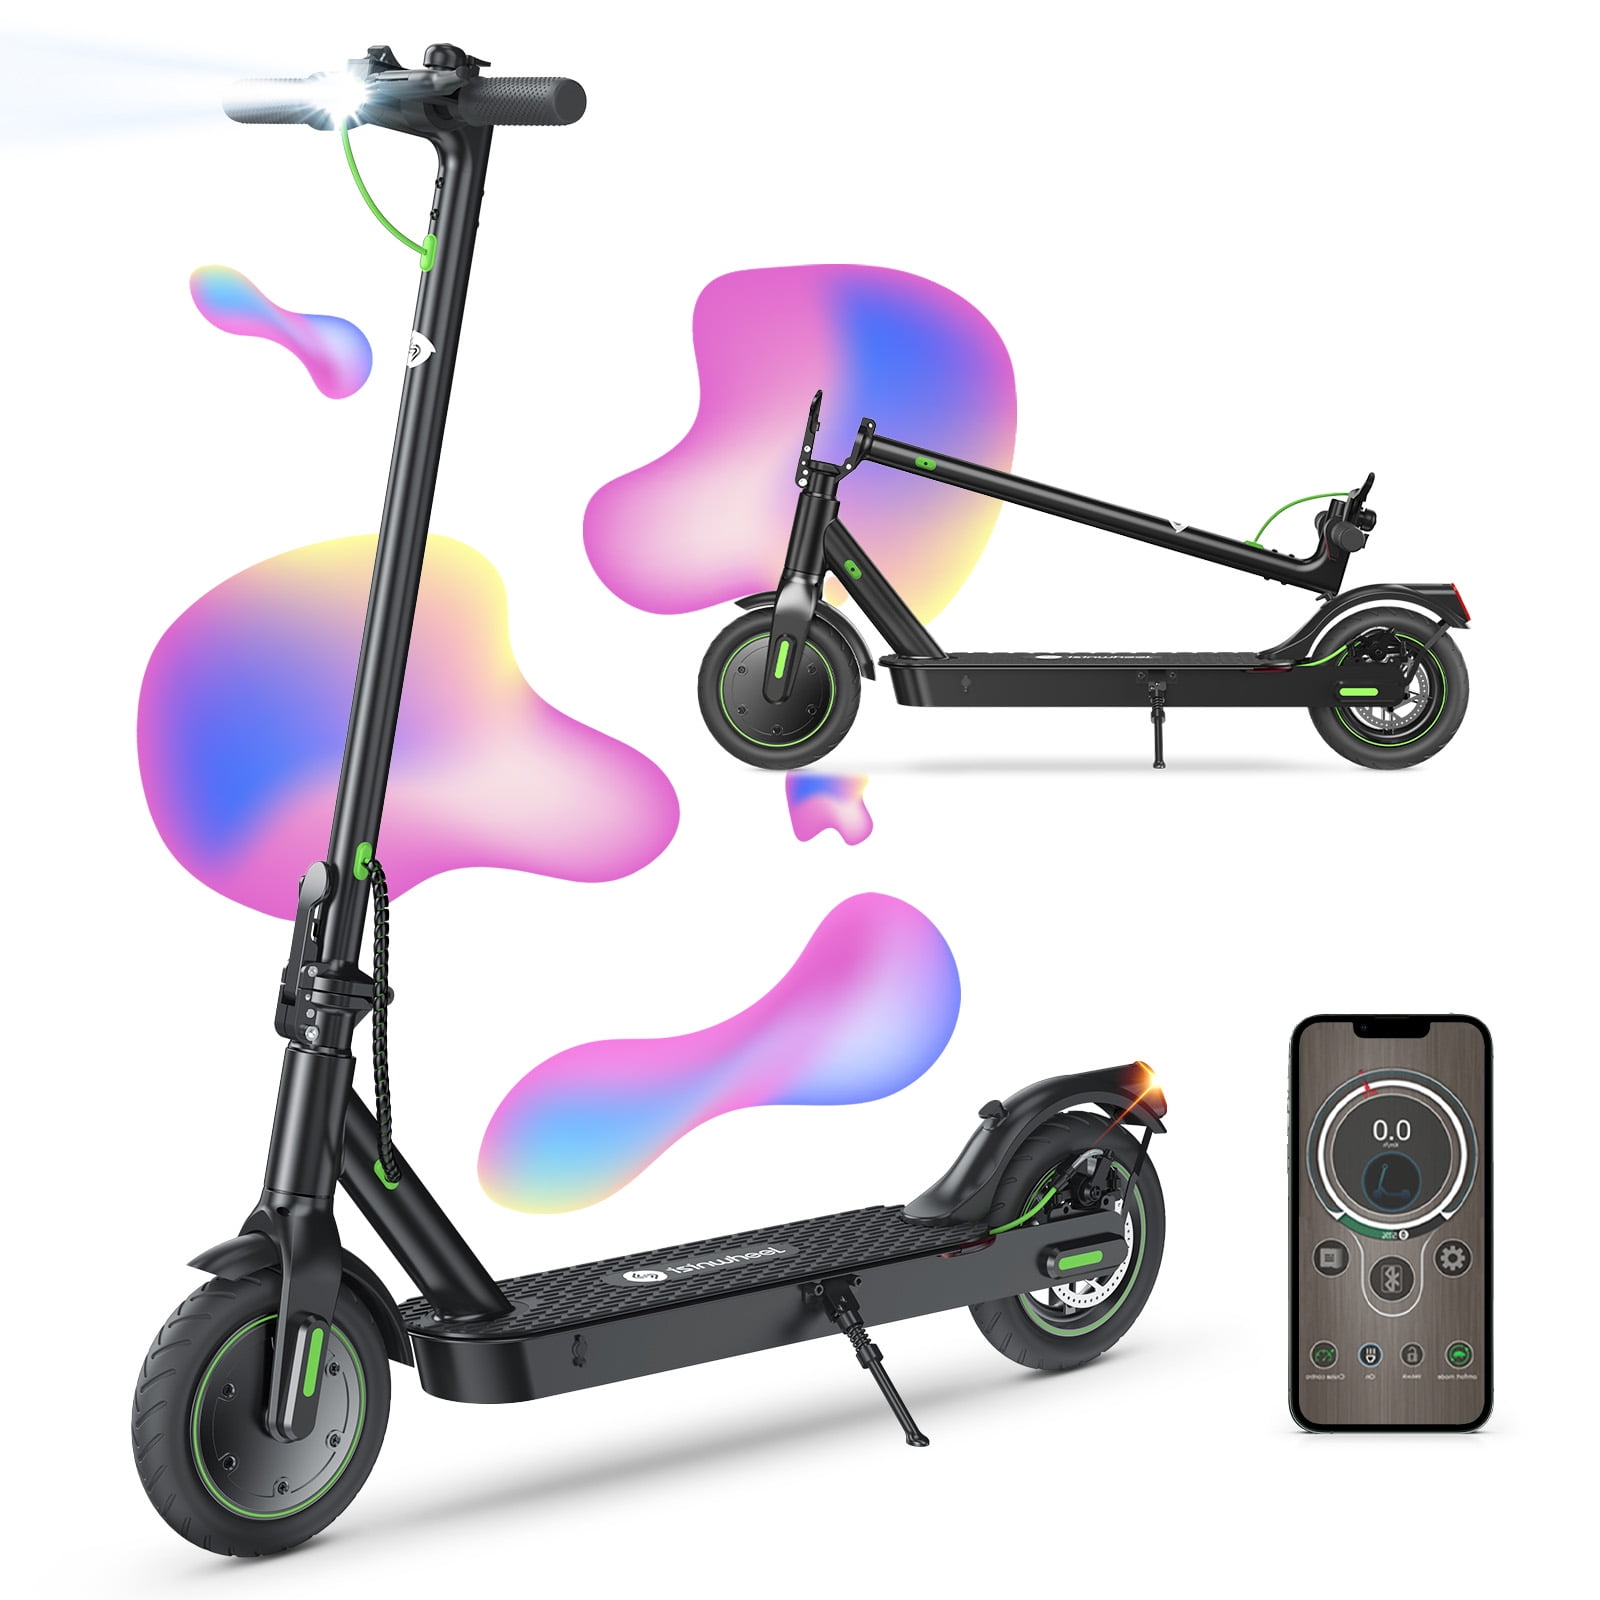 iSinwheel Electric Miles Range, Inflatable Control, 18.6 Scooter Adult Motor 8.5-inch Scooter, 350W Up 21 App Scooter, Tires, E S9Pro Electric MPH, Long To 7.5Ah Battery